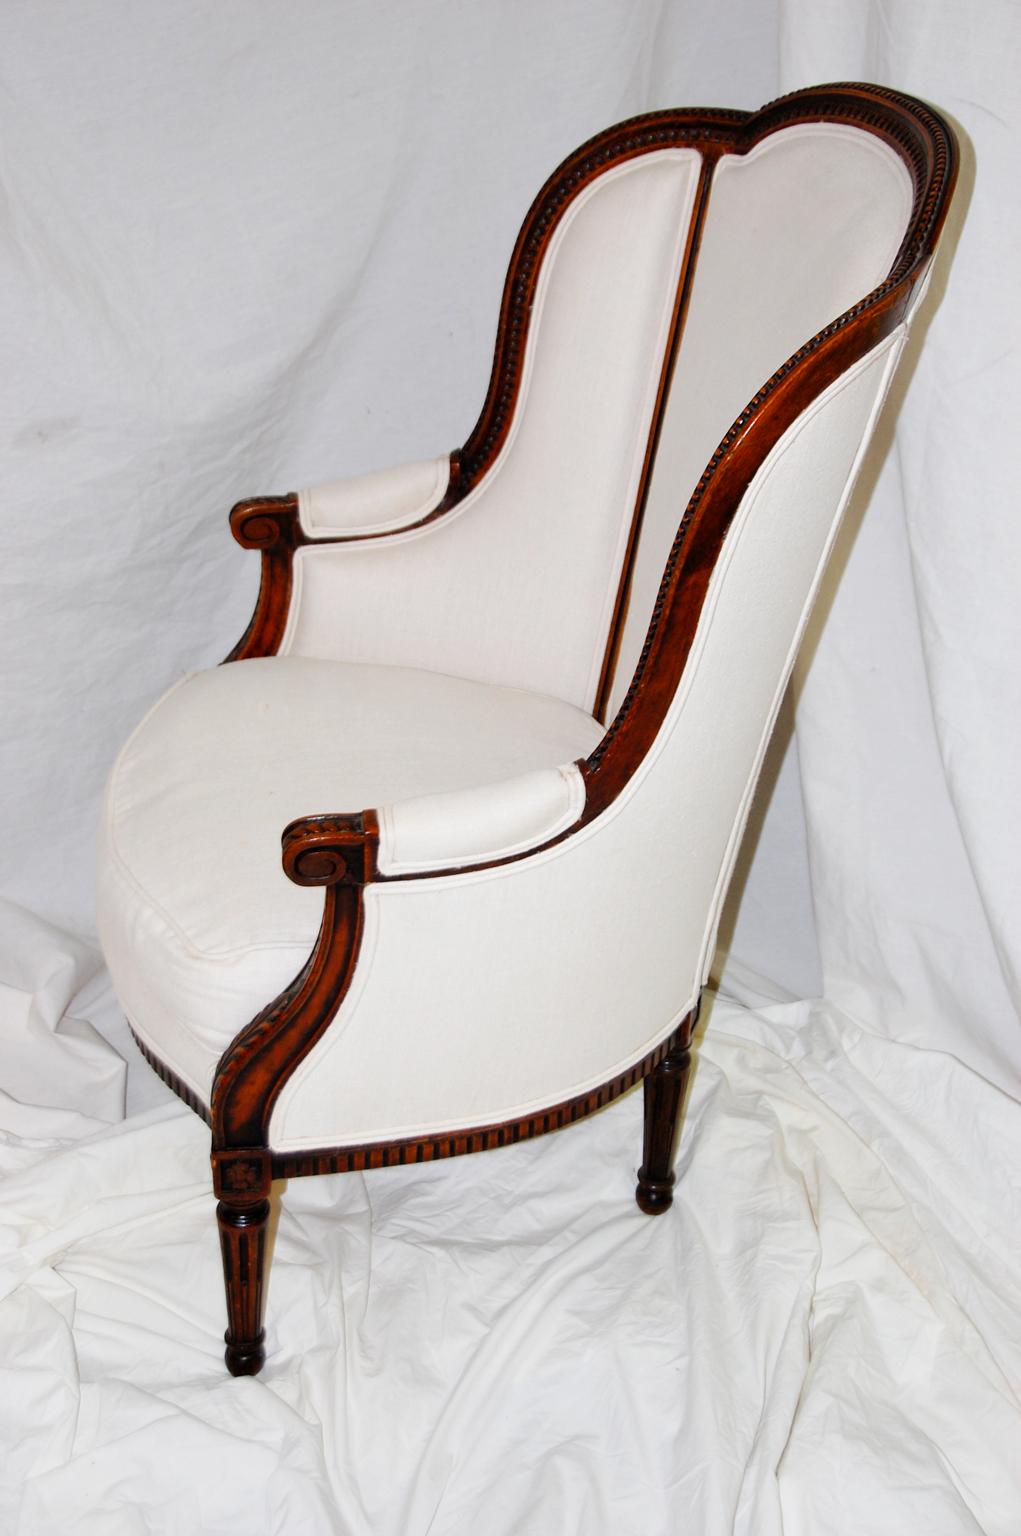 French Louis XVI style carved beechwood bergère chair in cream colored linen. The frame is crisply carved with acanthus leaf and running beads with carved stop fluted tapered turned legs. The division of the upholstery into three sections in both